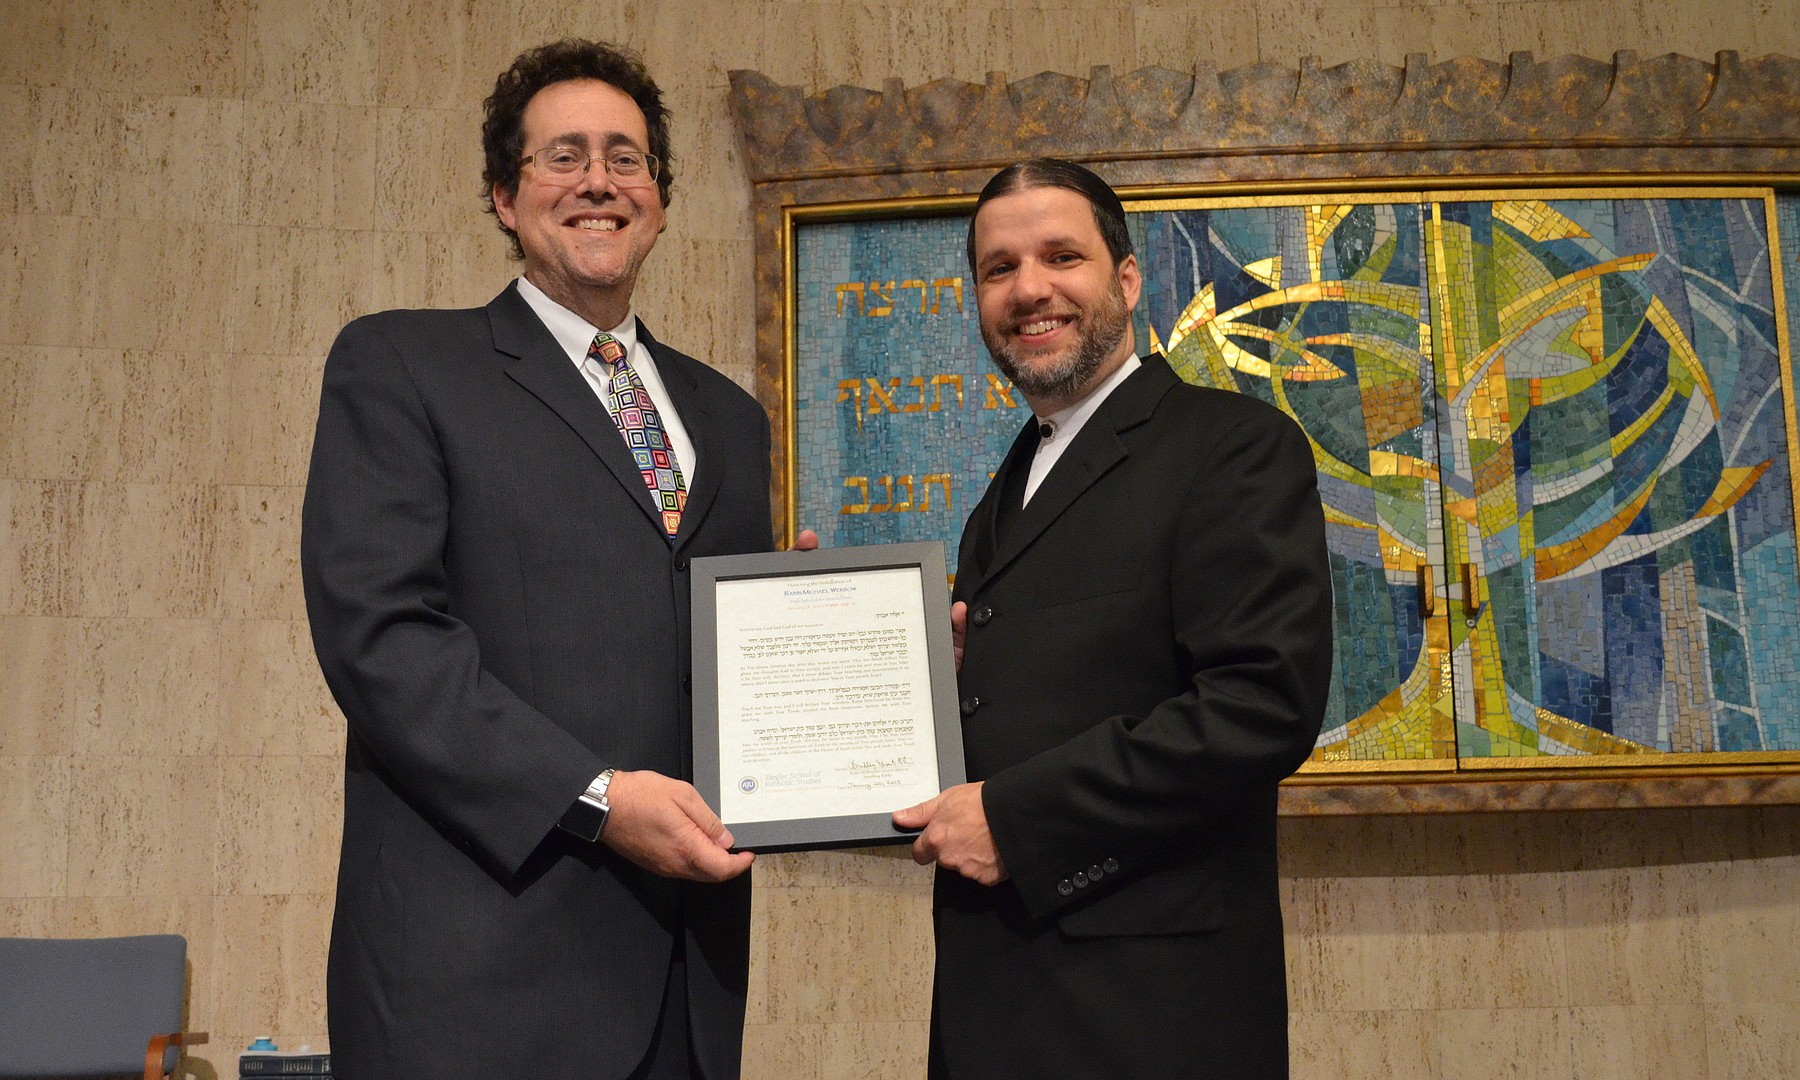 PHOTO GALLERY: Temple Beth Sholom Welcomes Rabbi | Your Observer